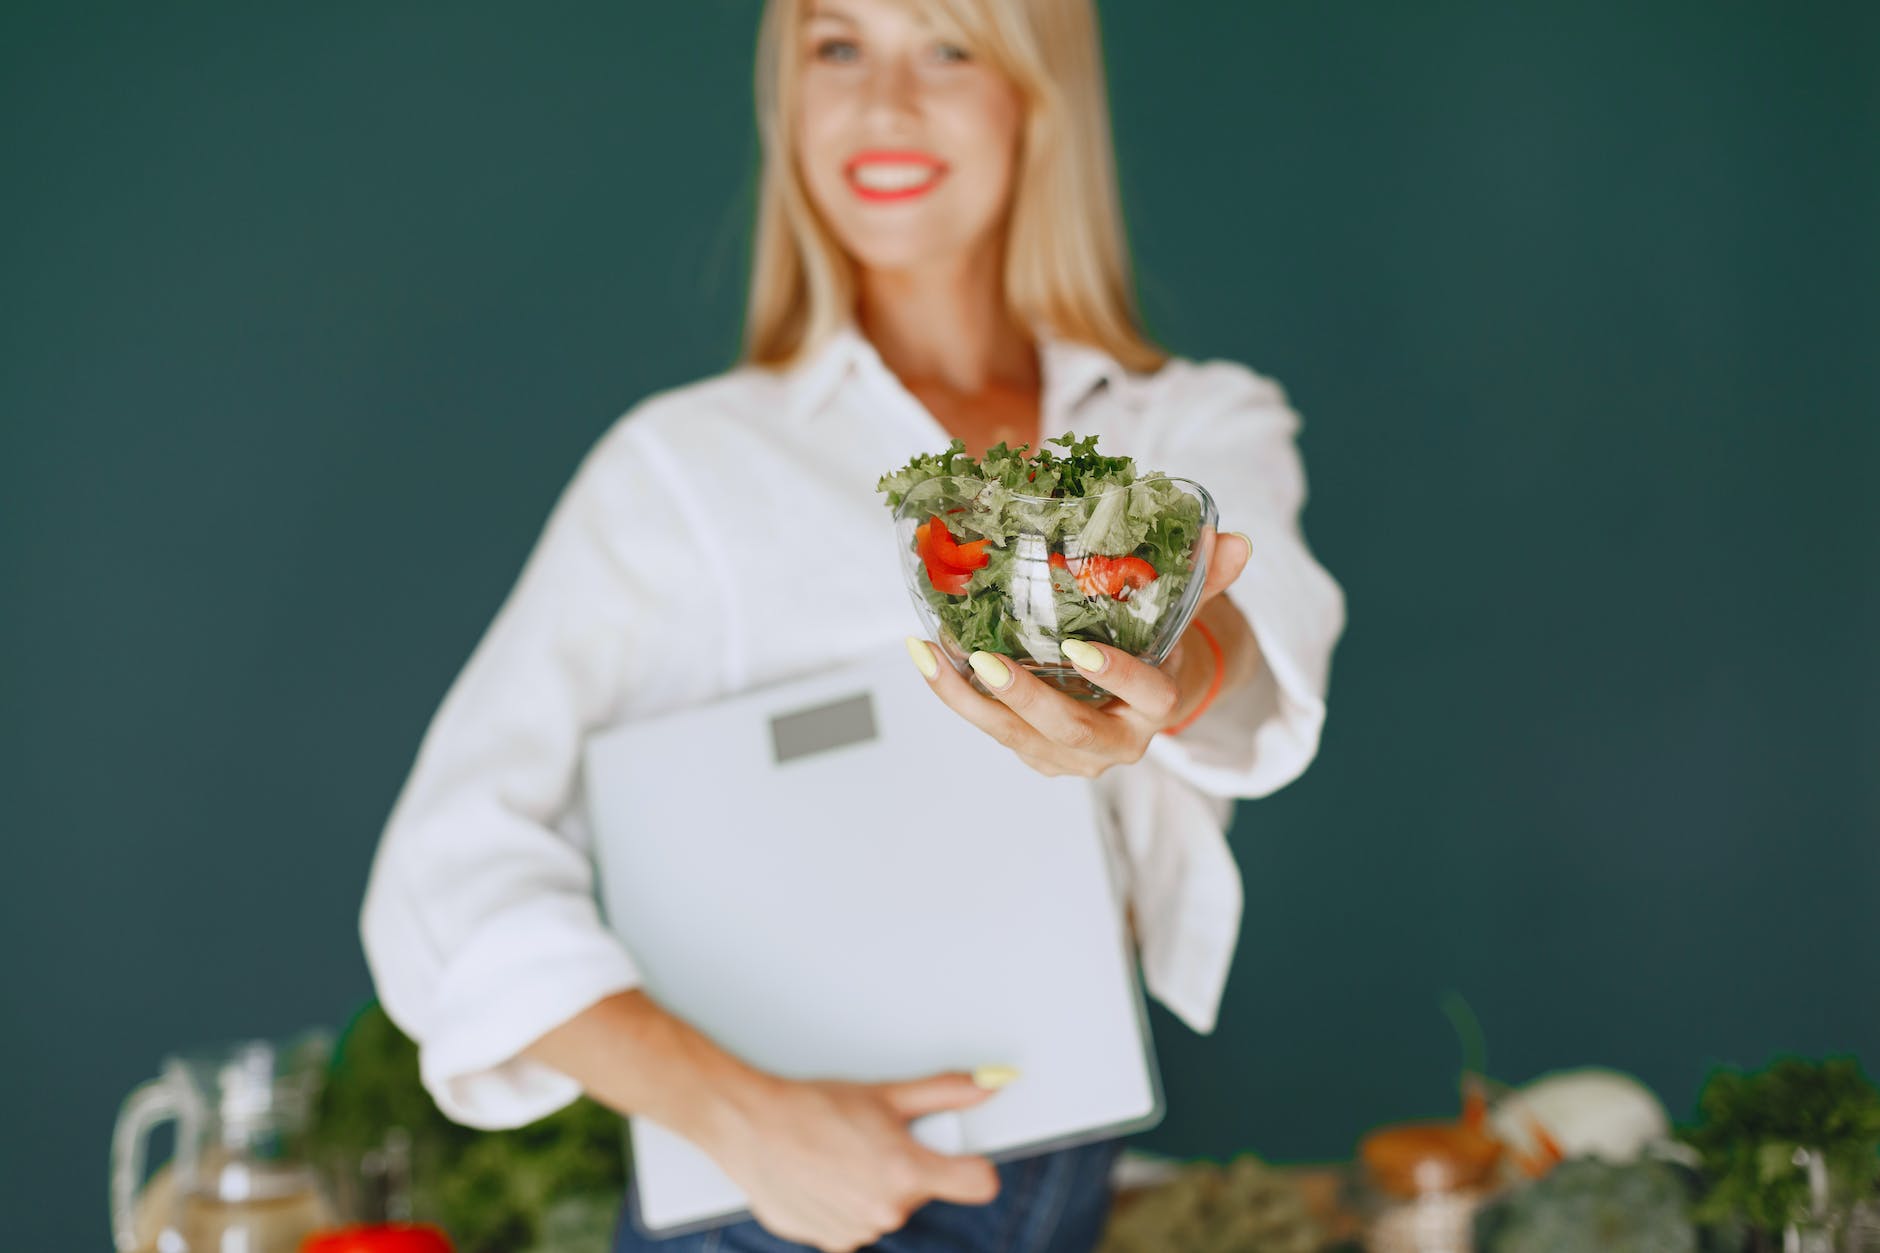 woman holding a bowl with salad and smiling